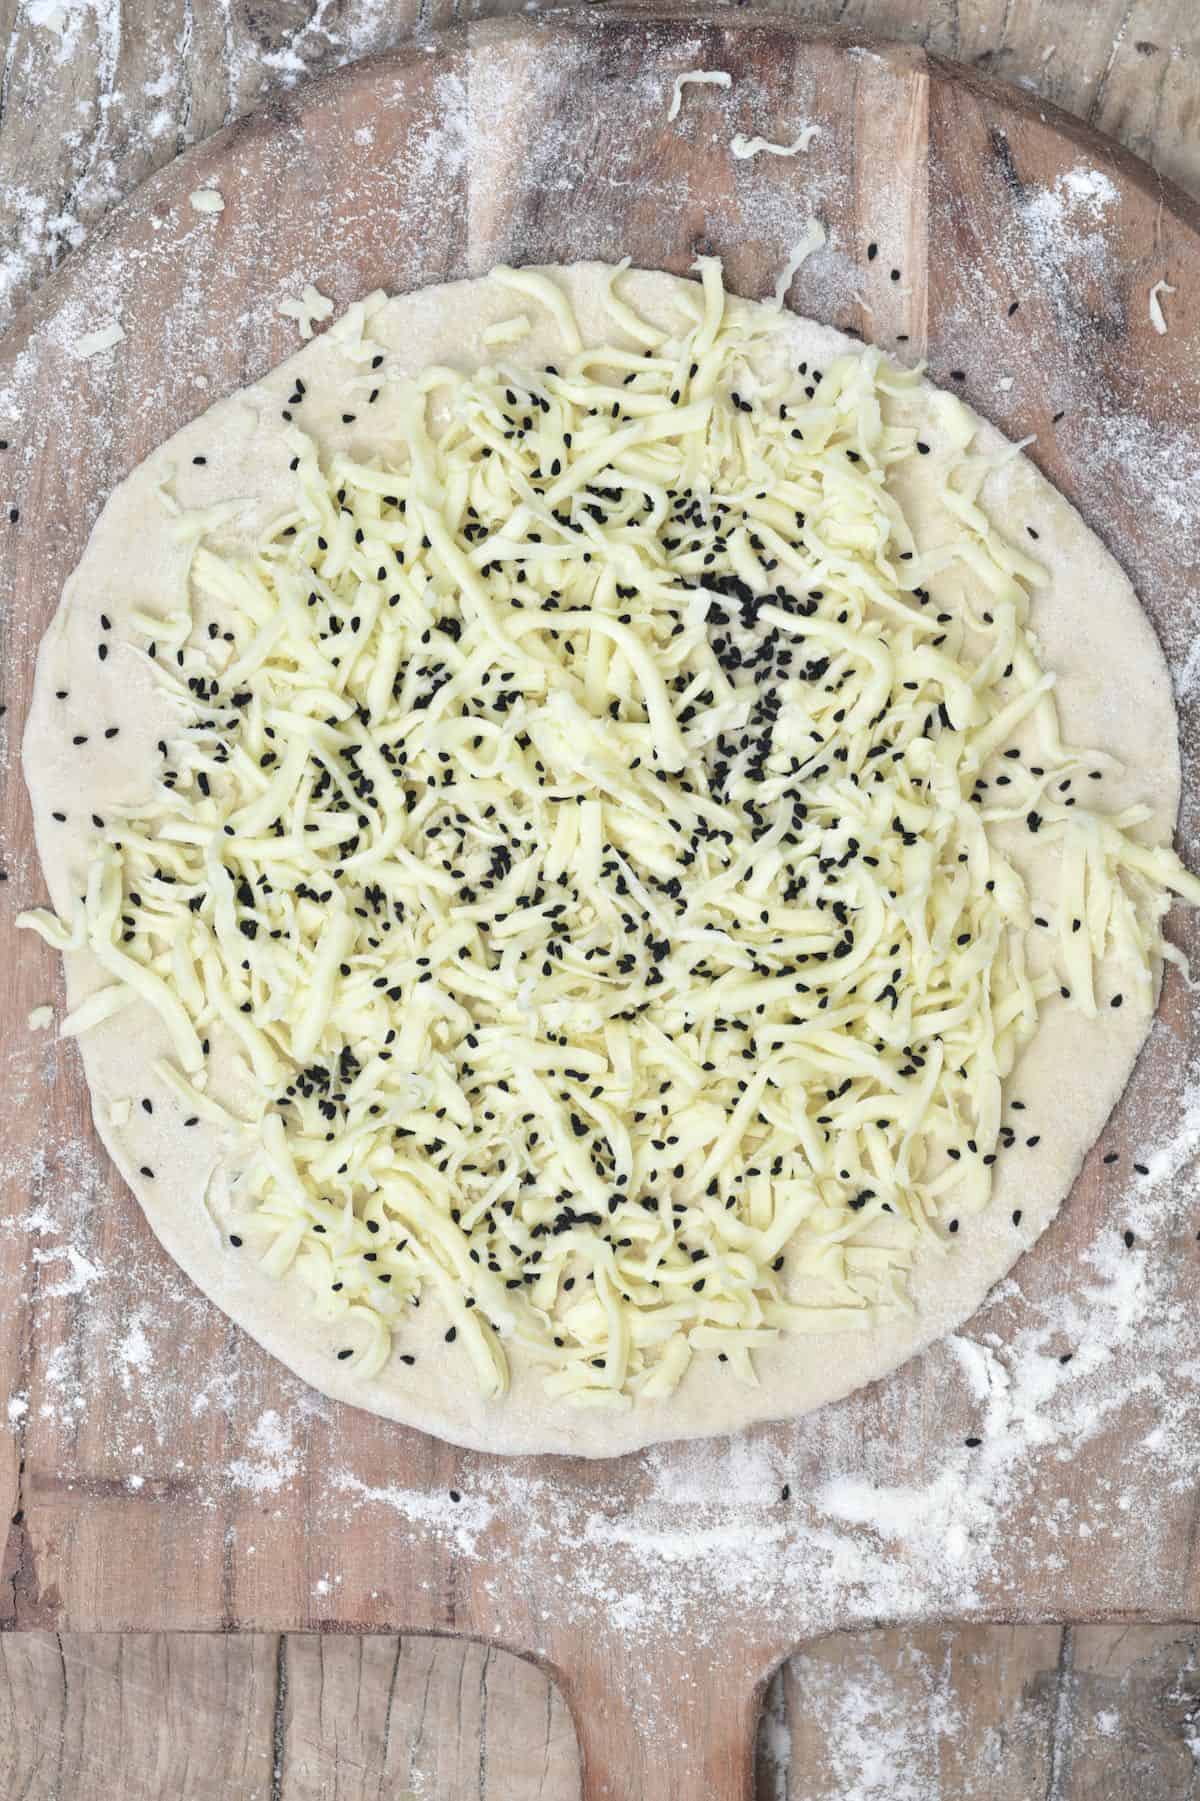 Cheese and seeds manakish ready to bake